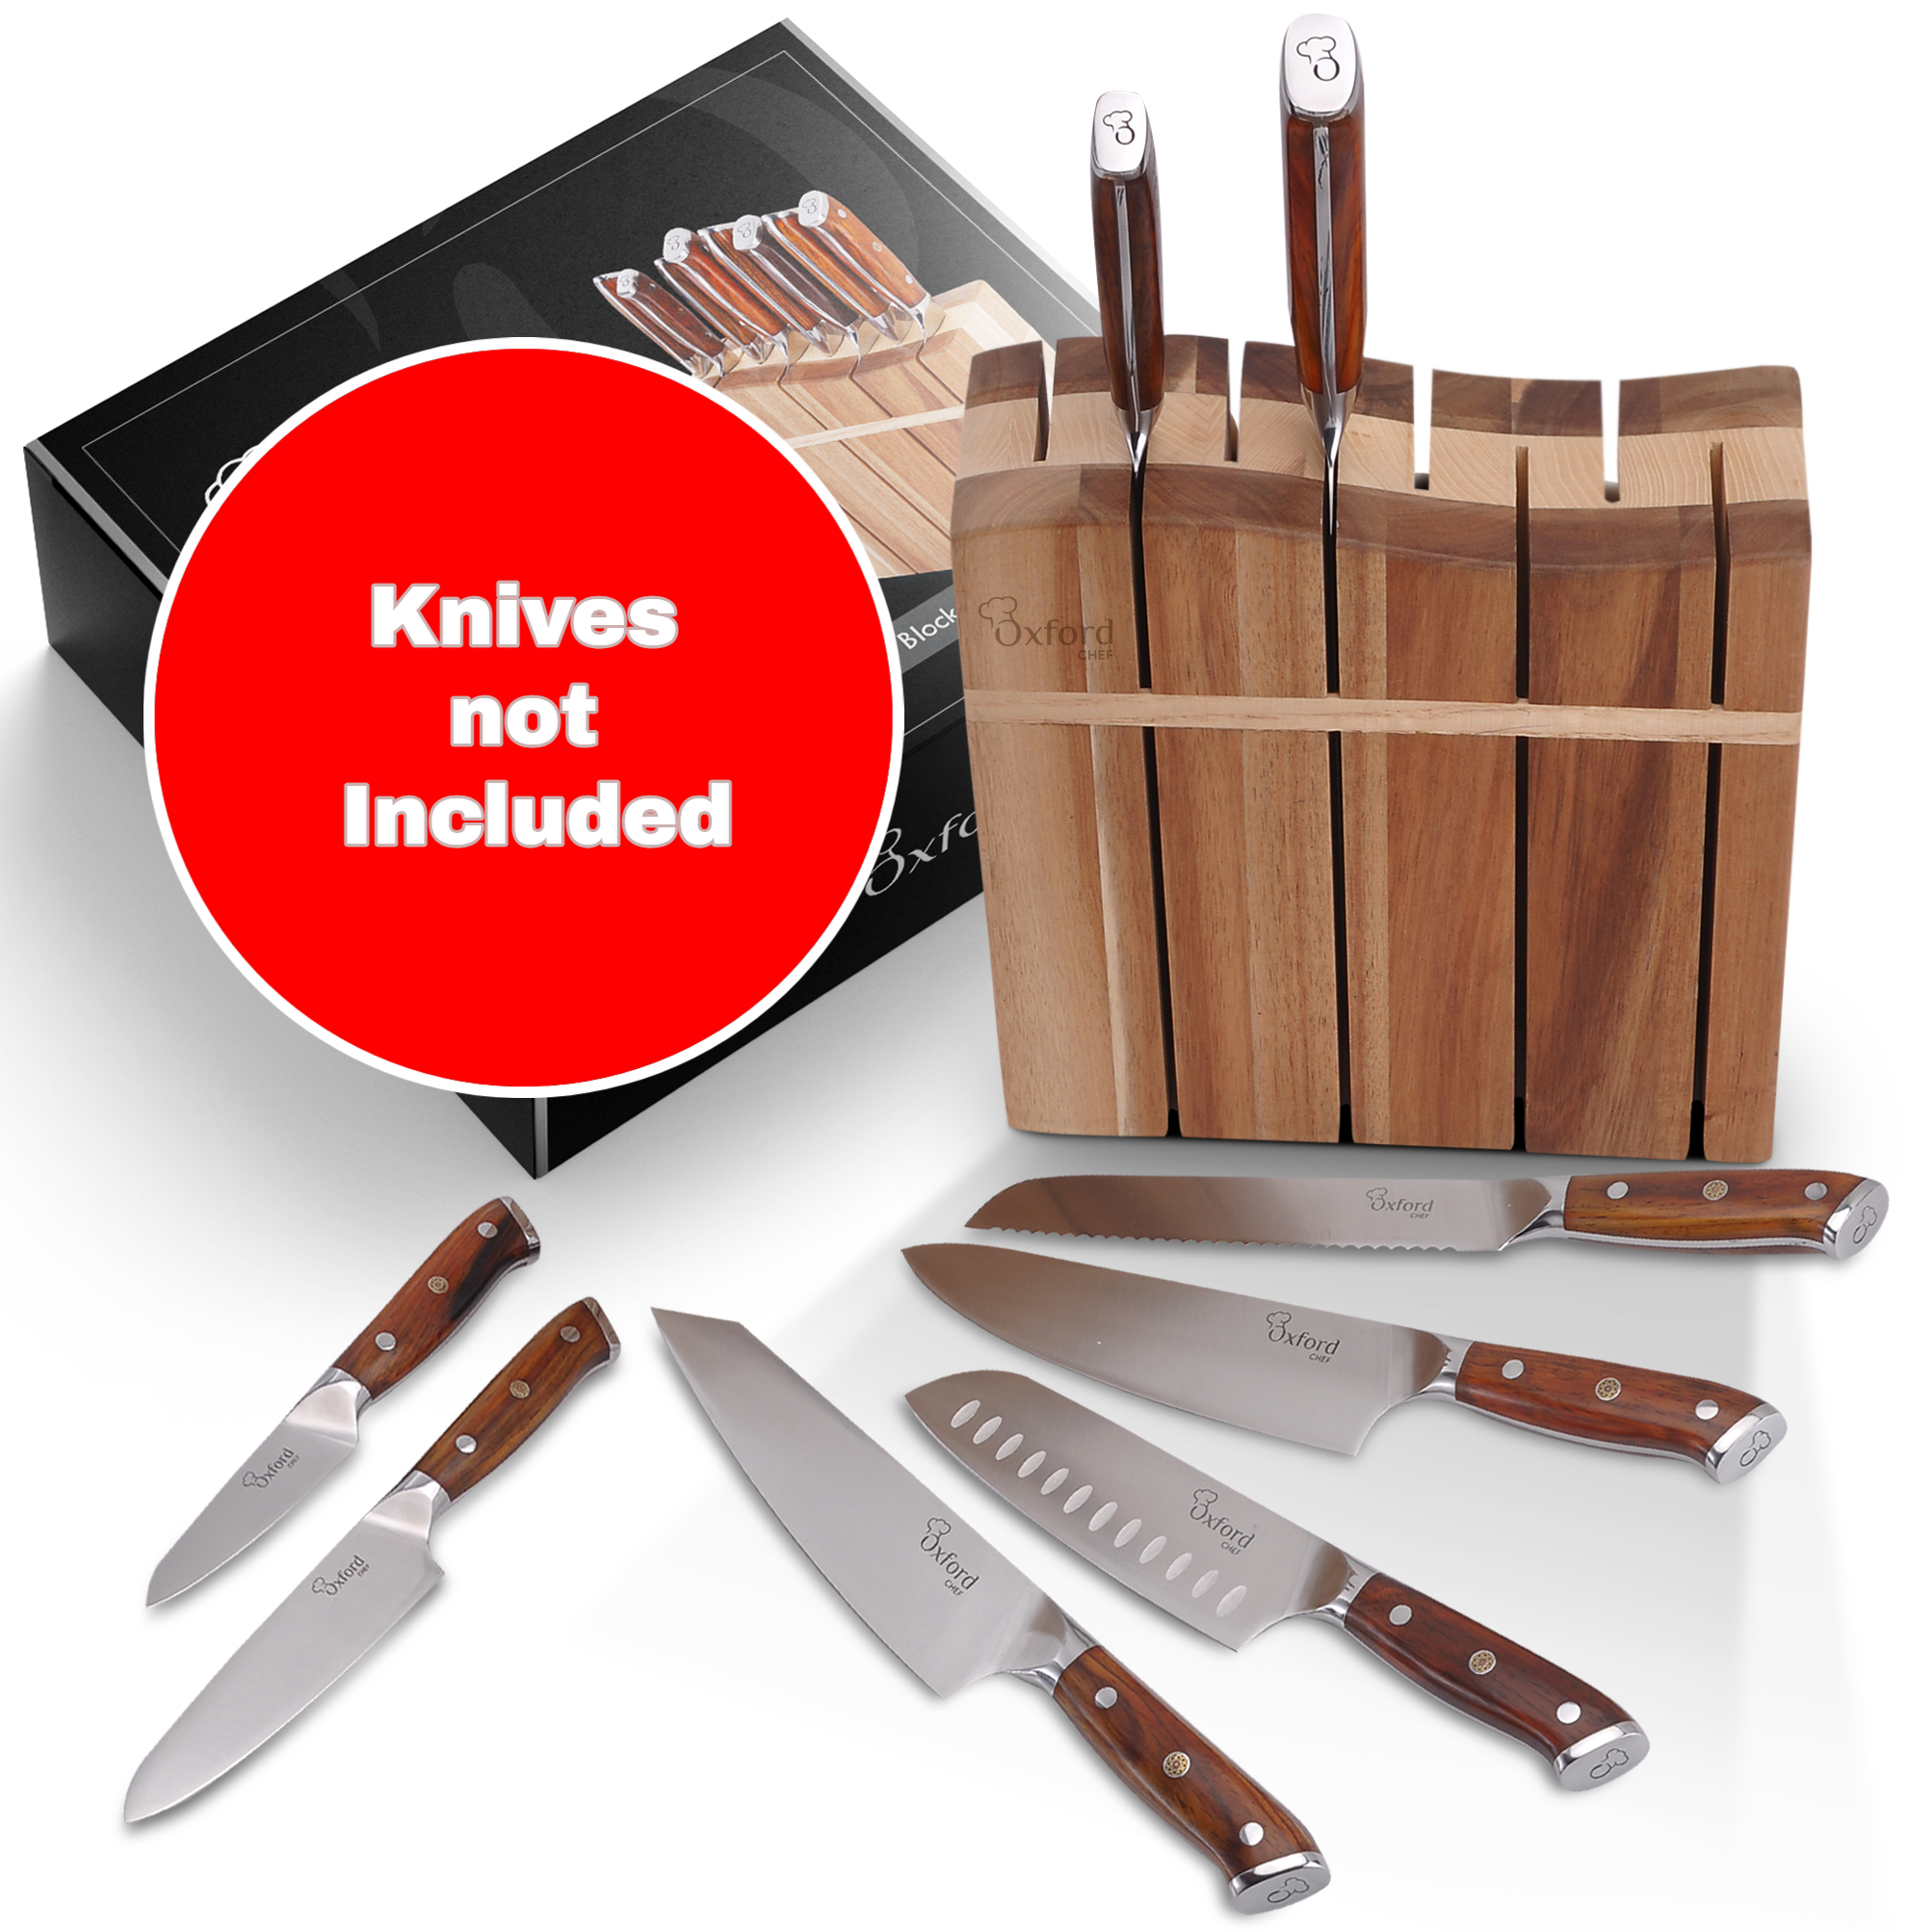 Wooden Kitchen Knife Block - Luxury Hand-Crafted Acacia Wood 8 Slot Storage Block. Can Hold 8 Knives Up To 9" Long. Non-Skid, Non-Scratch Rubber Feet